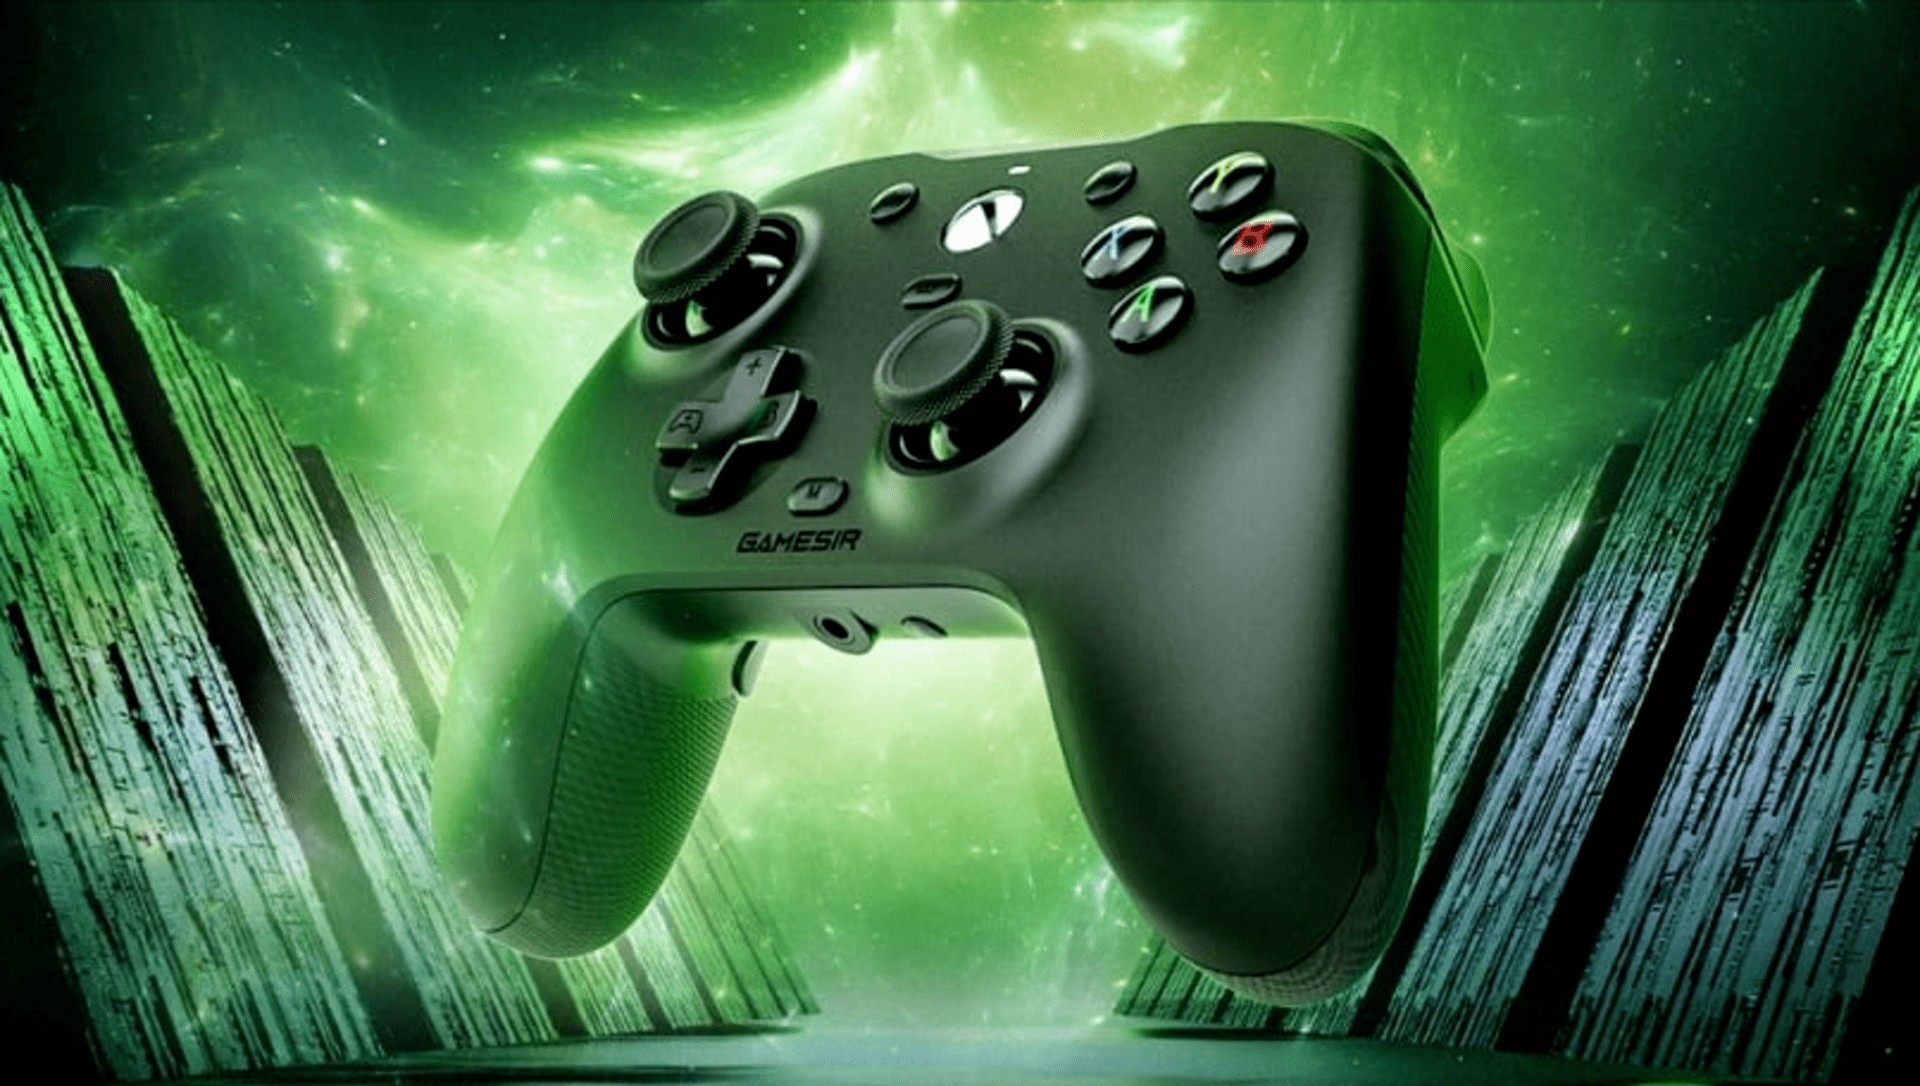 GameSir launches G7 controller with customizable design and support for Xbox and PC
